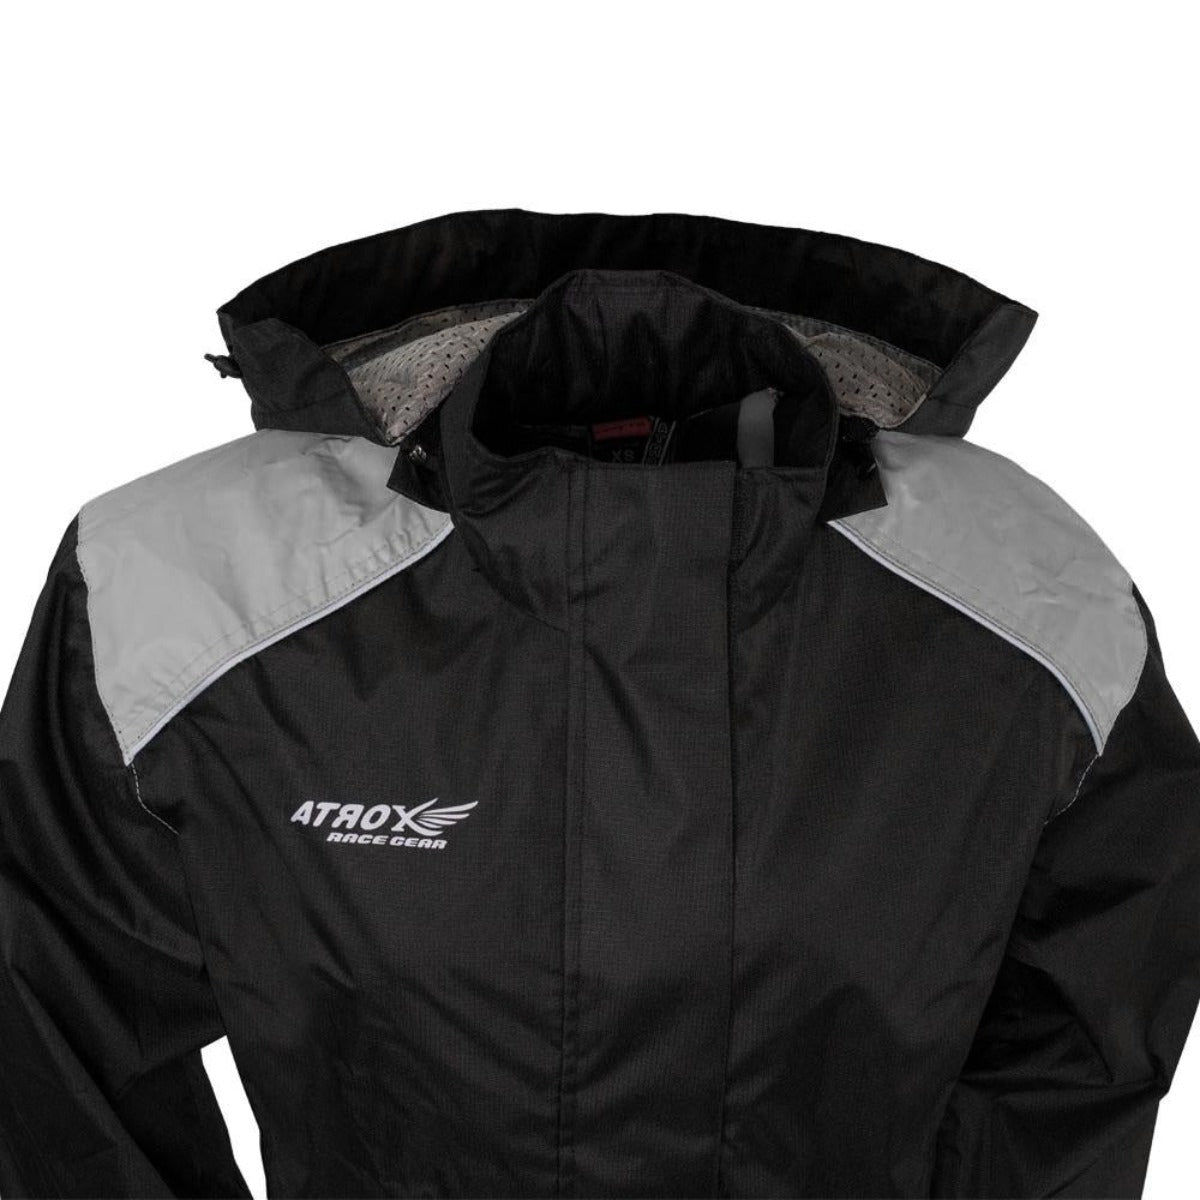 First Manufacturing Ripstop - Women's Breathable Rain Suit, Black/Grey